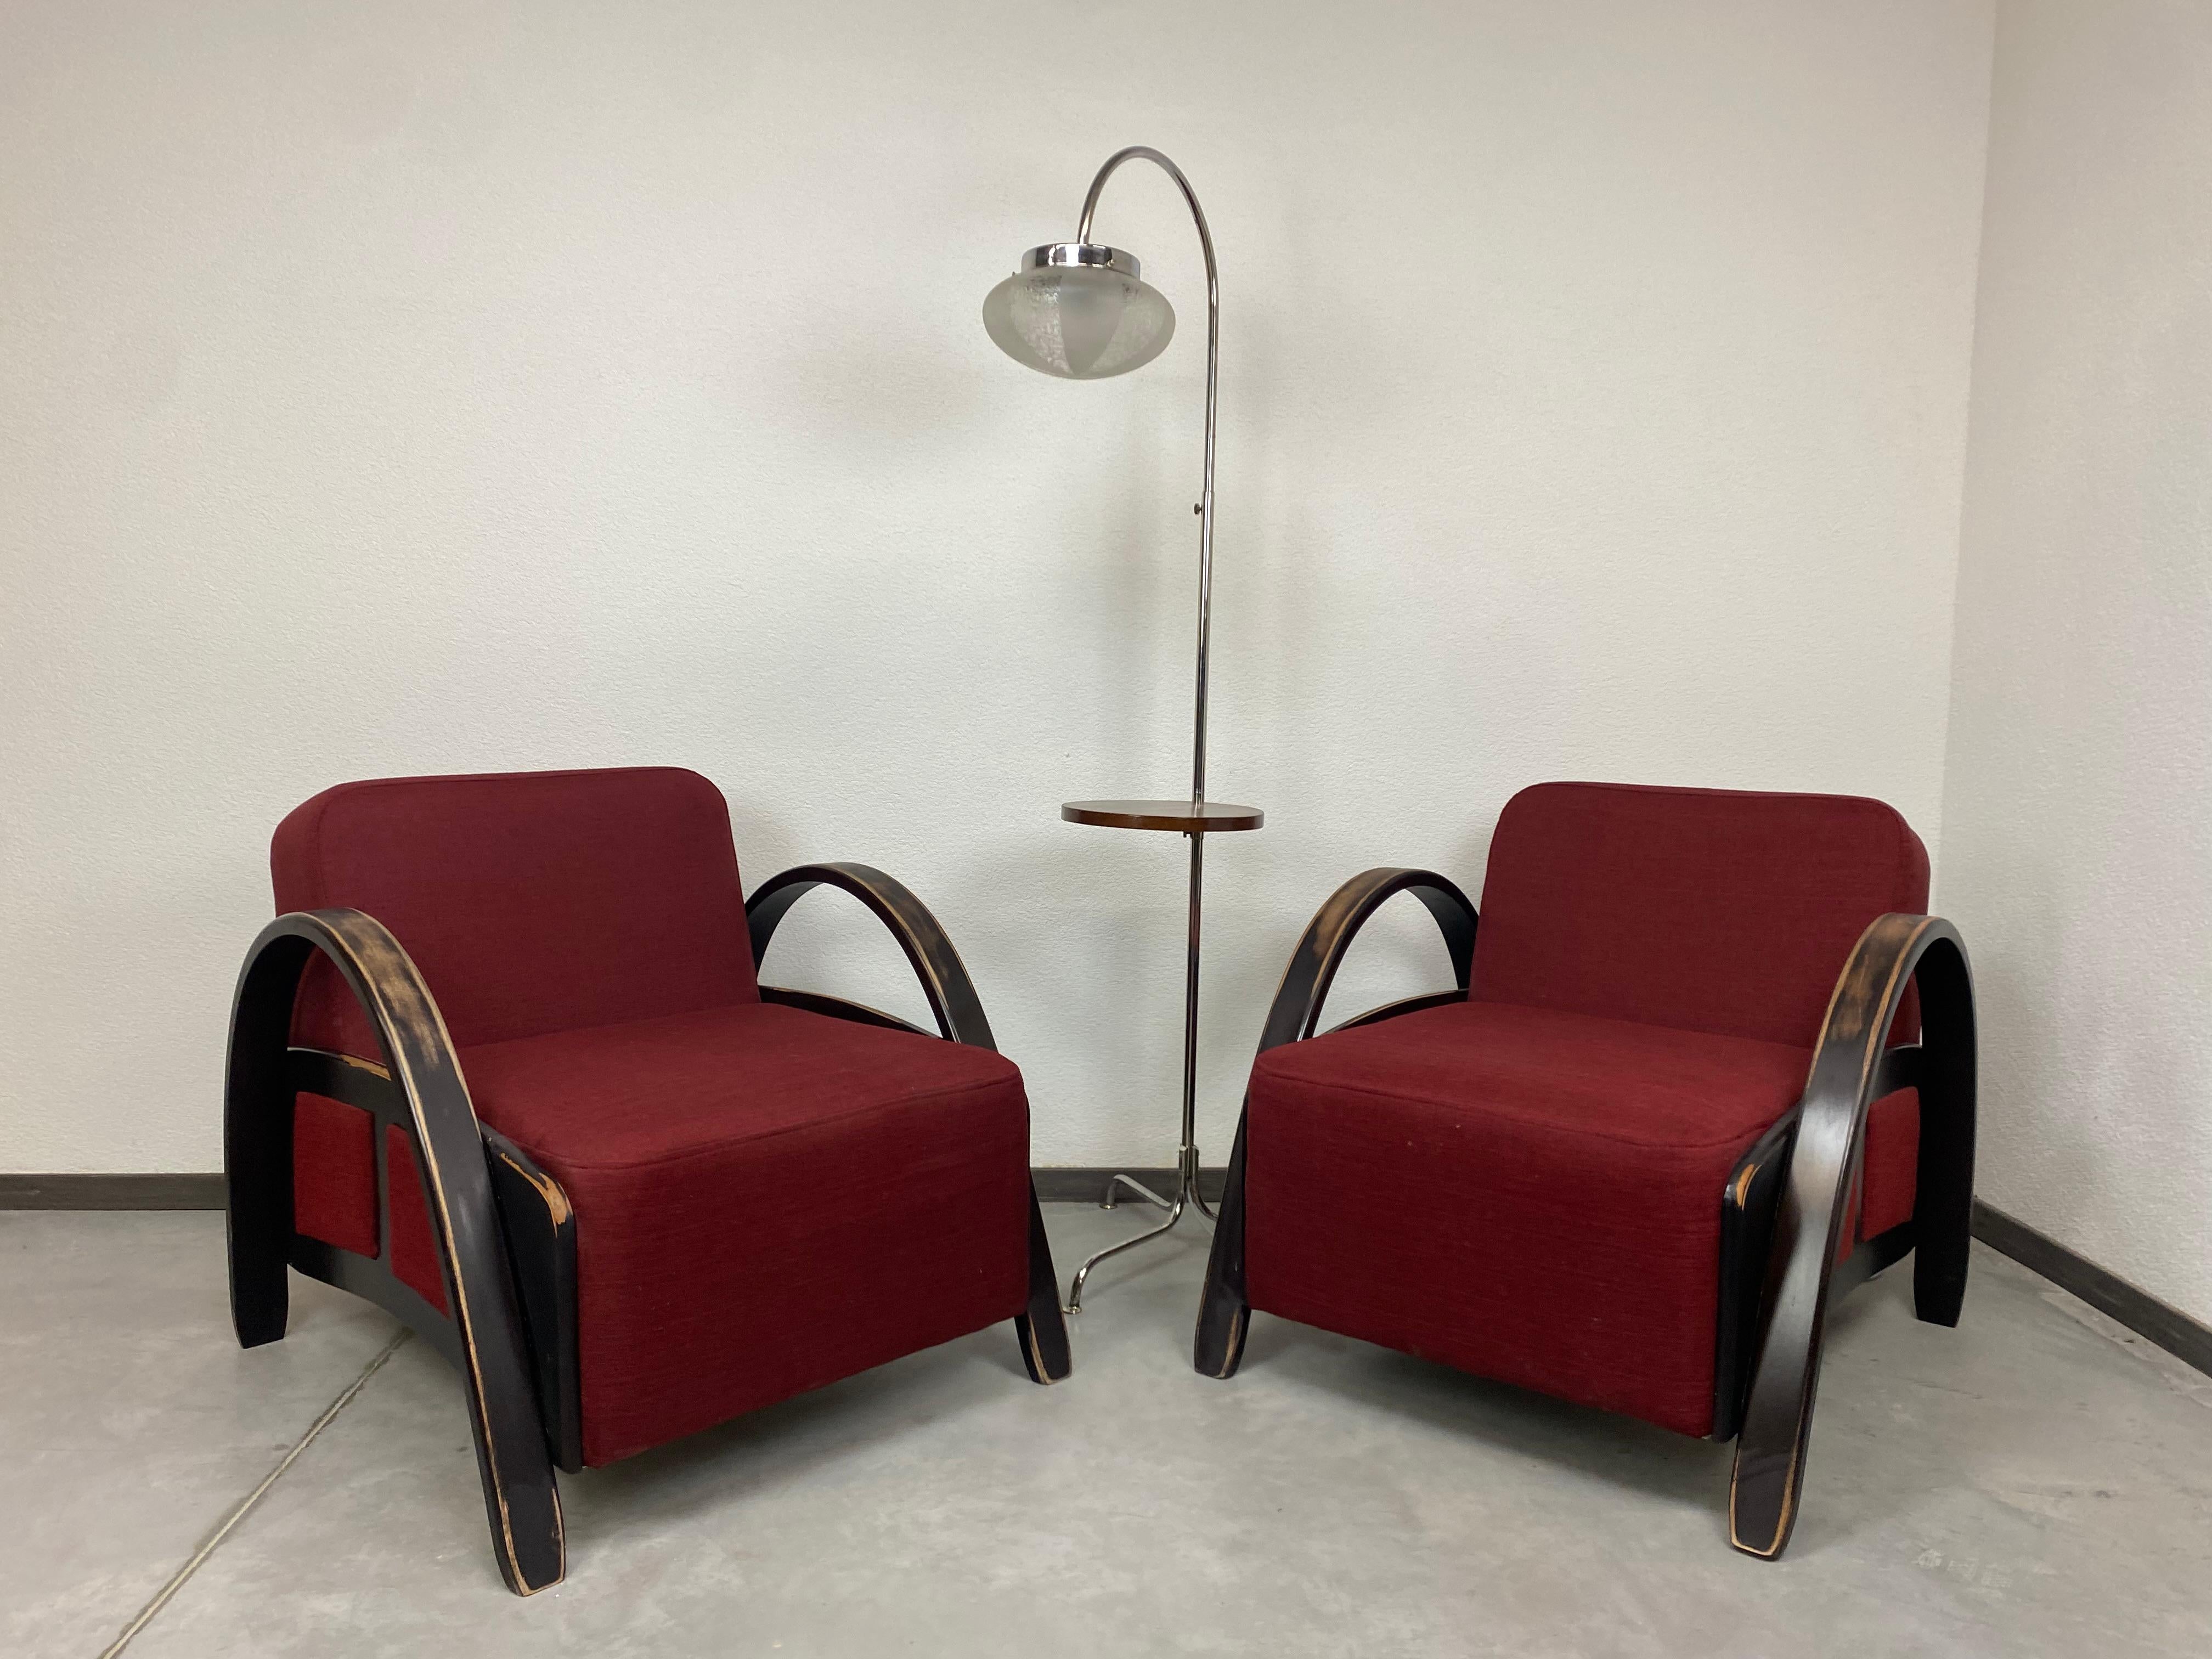 Red vintage armchairs in style of Art Deco in original vintage condition.